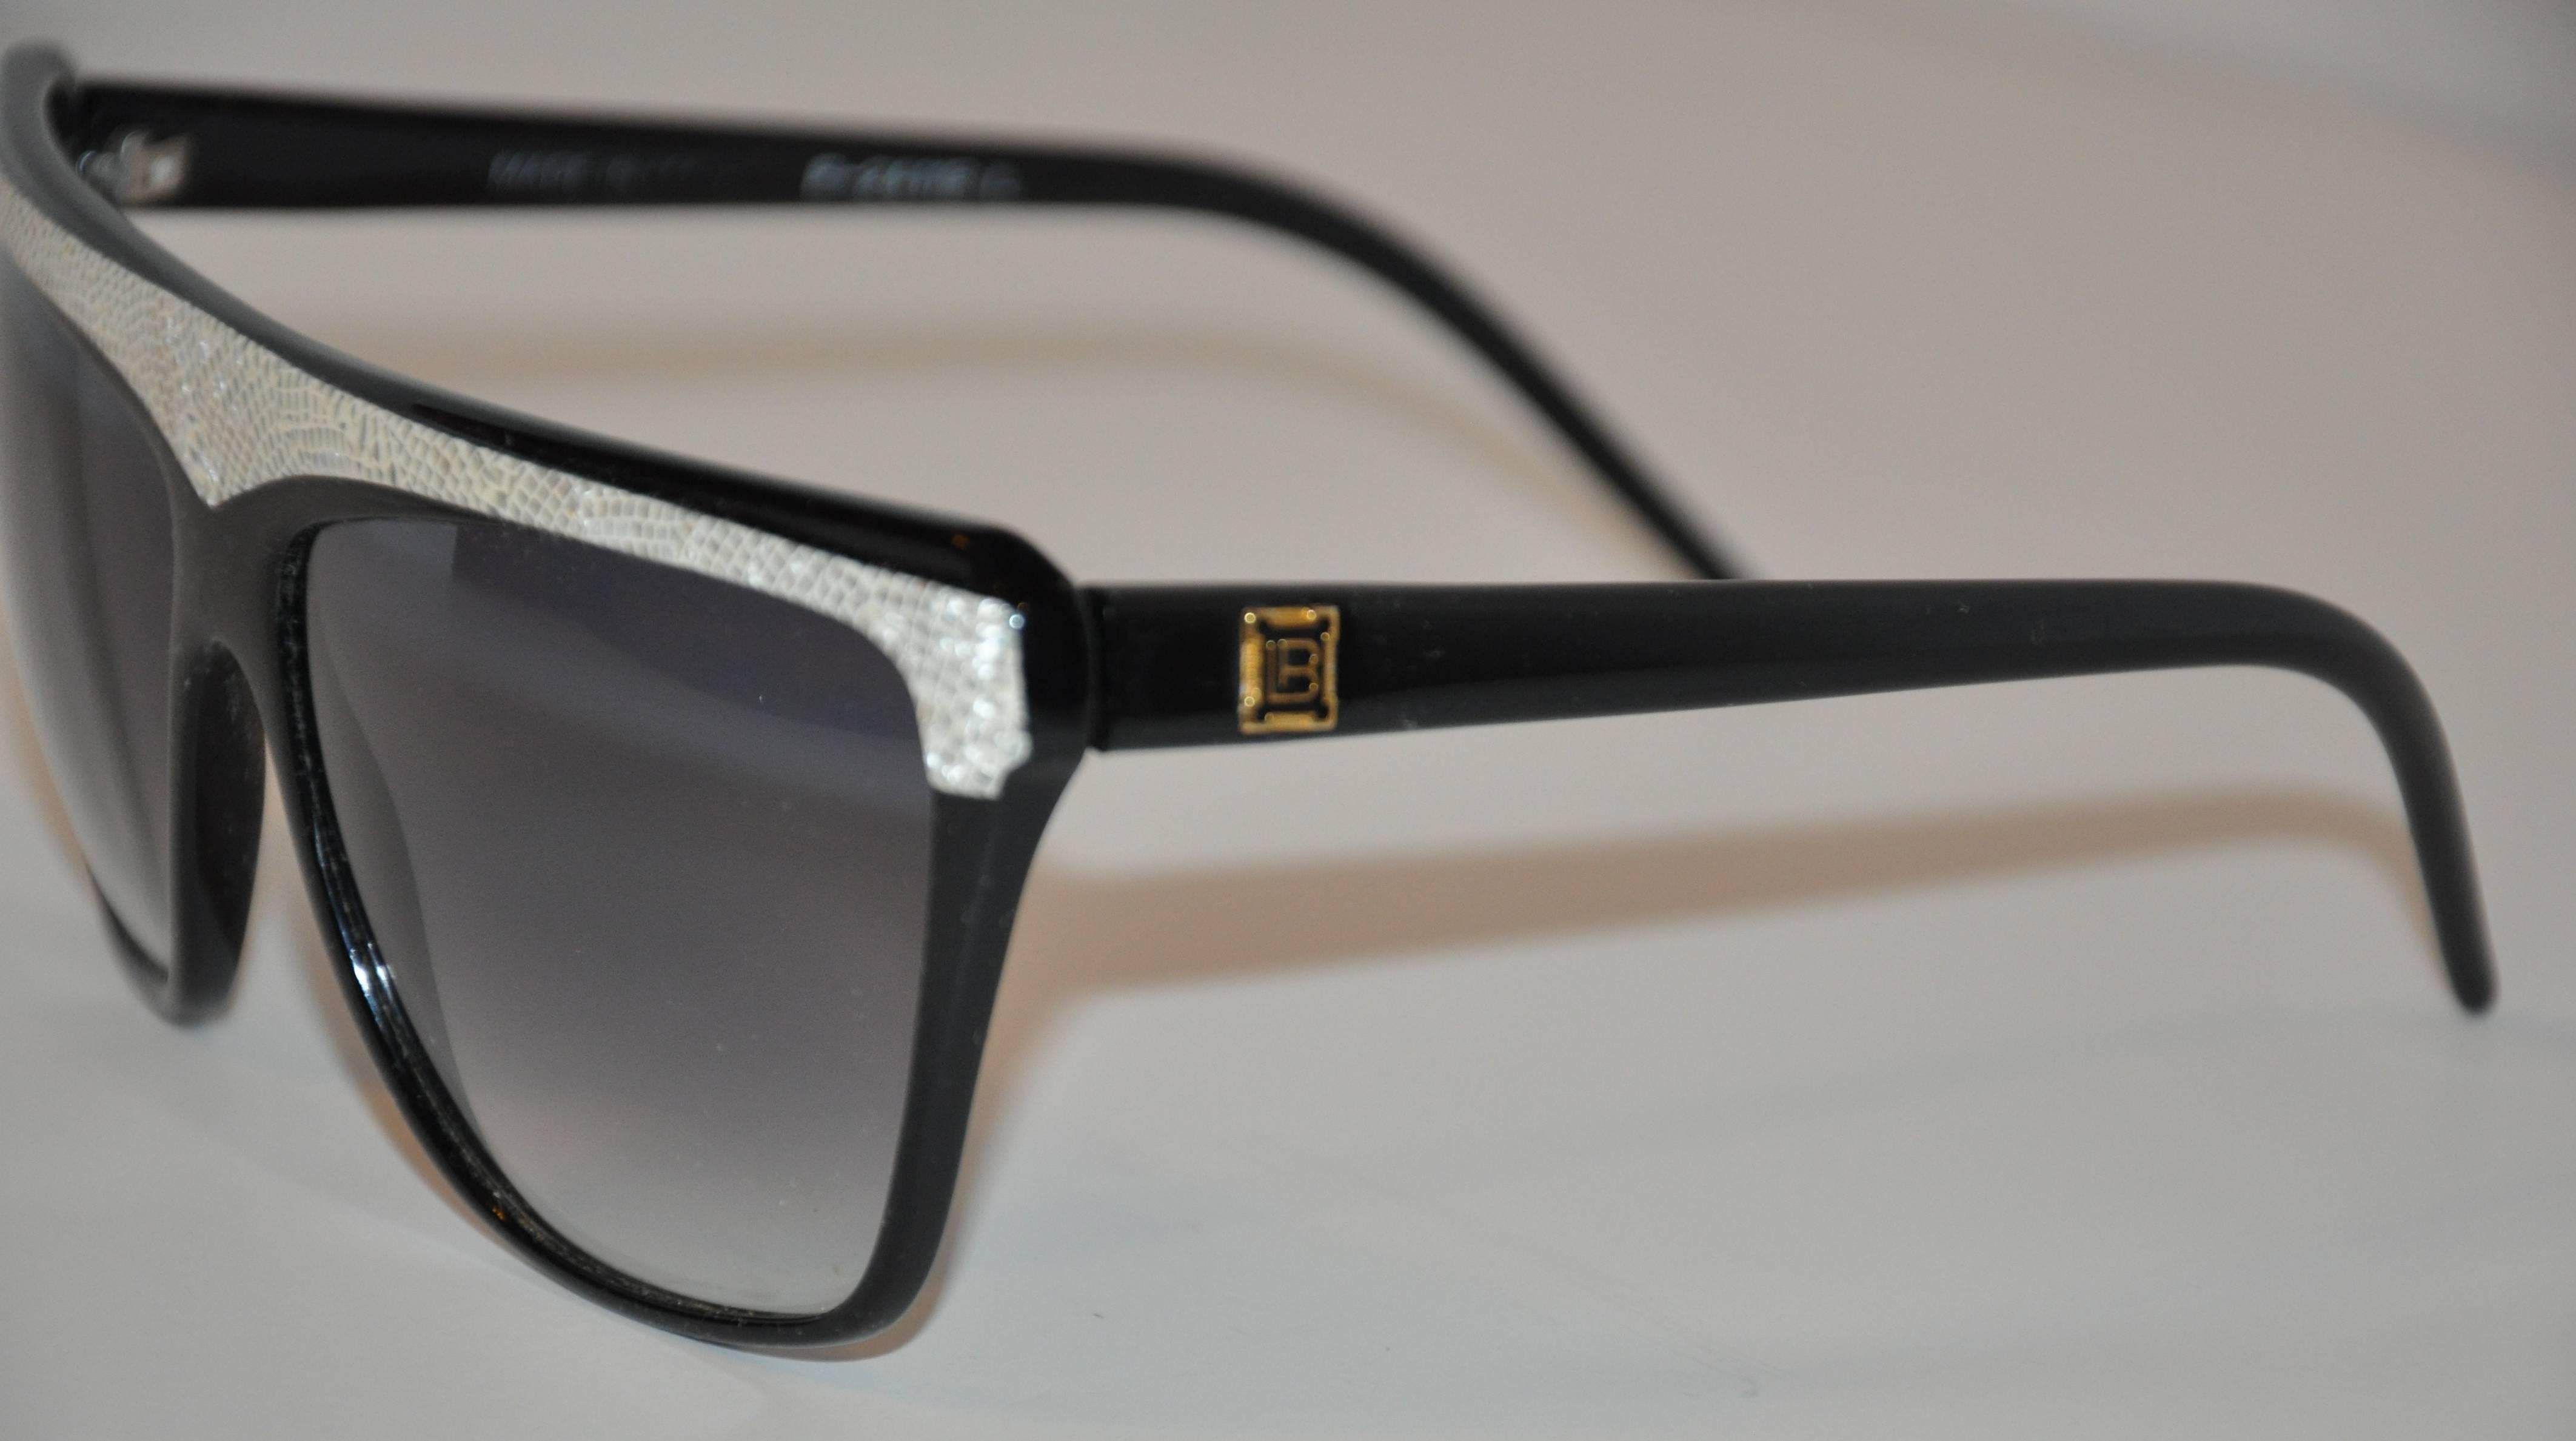 Laura Biagiotti wonderful combination of black lucid frames accented with gray & cream "snake" lucid on top of the frames measures 6" in width, 2 7/16" in height, and 5 1/2" in length on the arms. The arms are accented